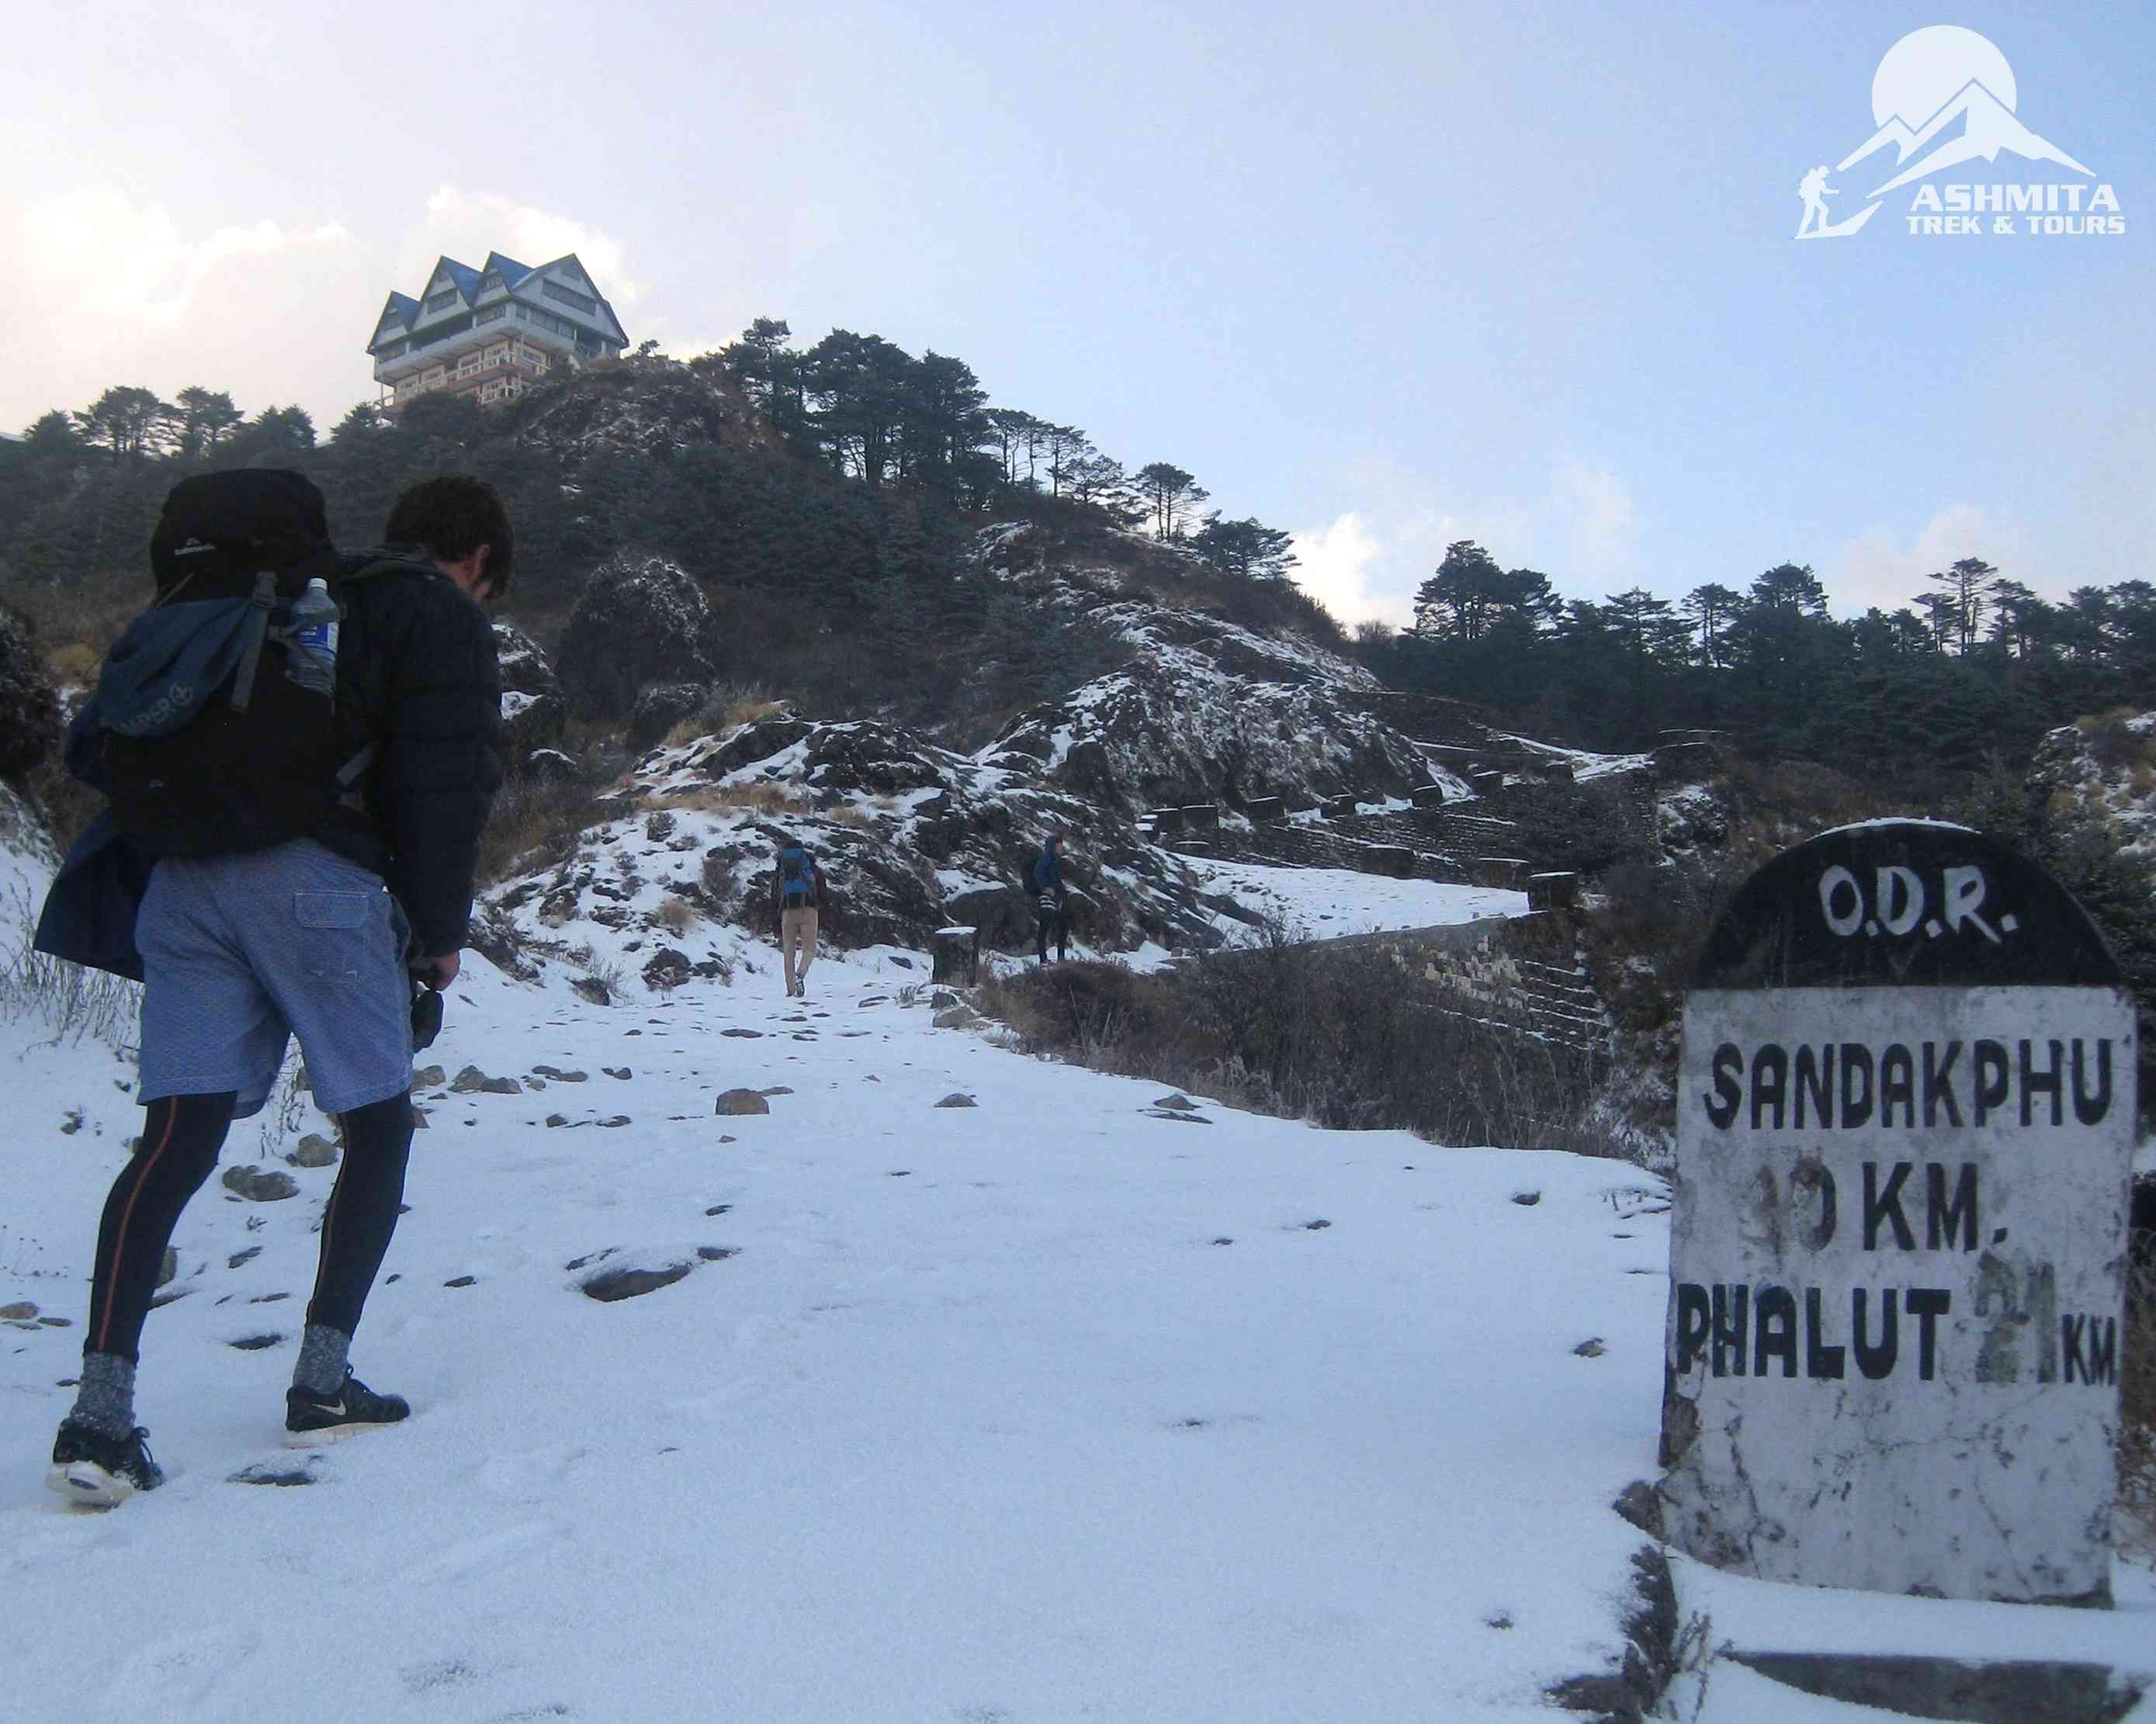 Final ascend to Sandakphu the pic during in winter